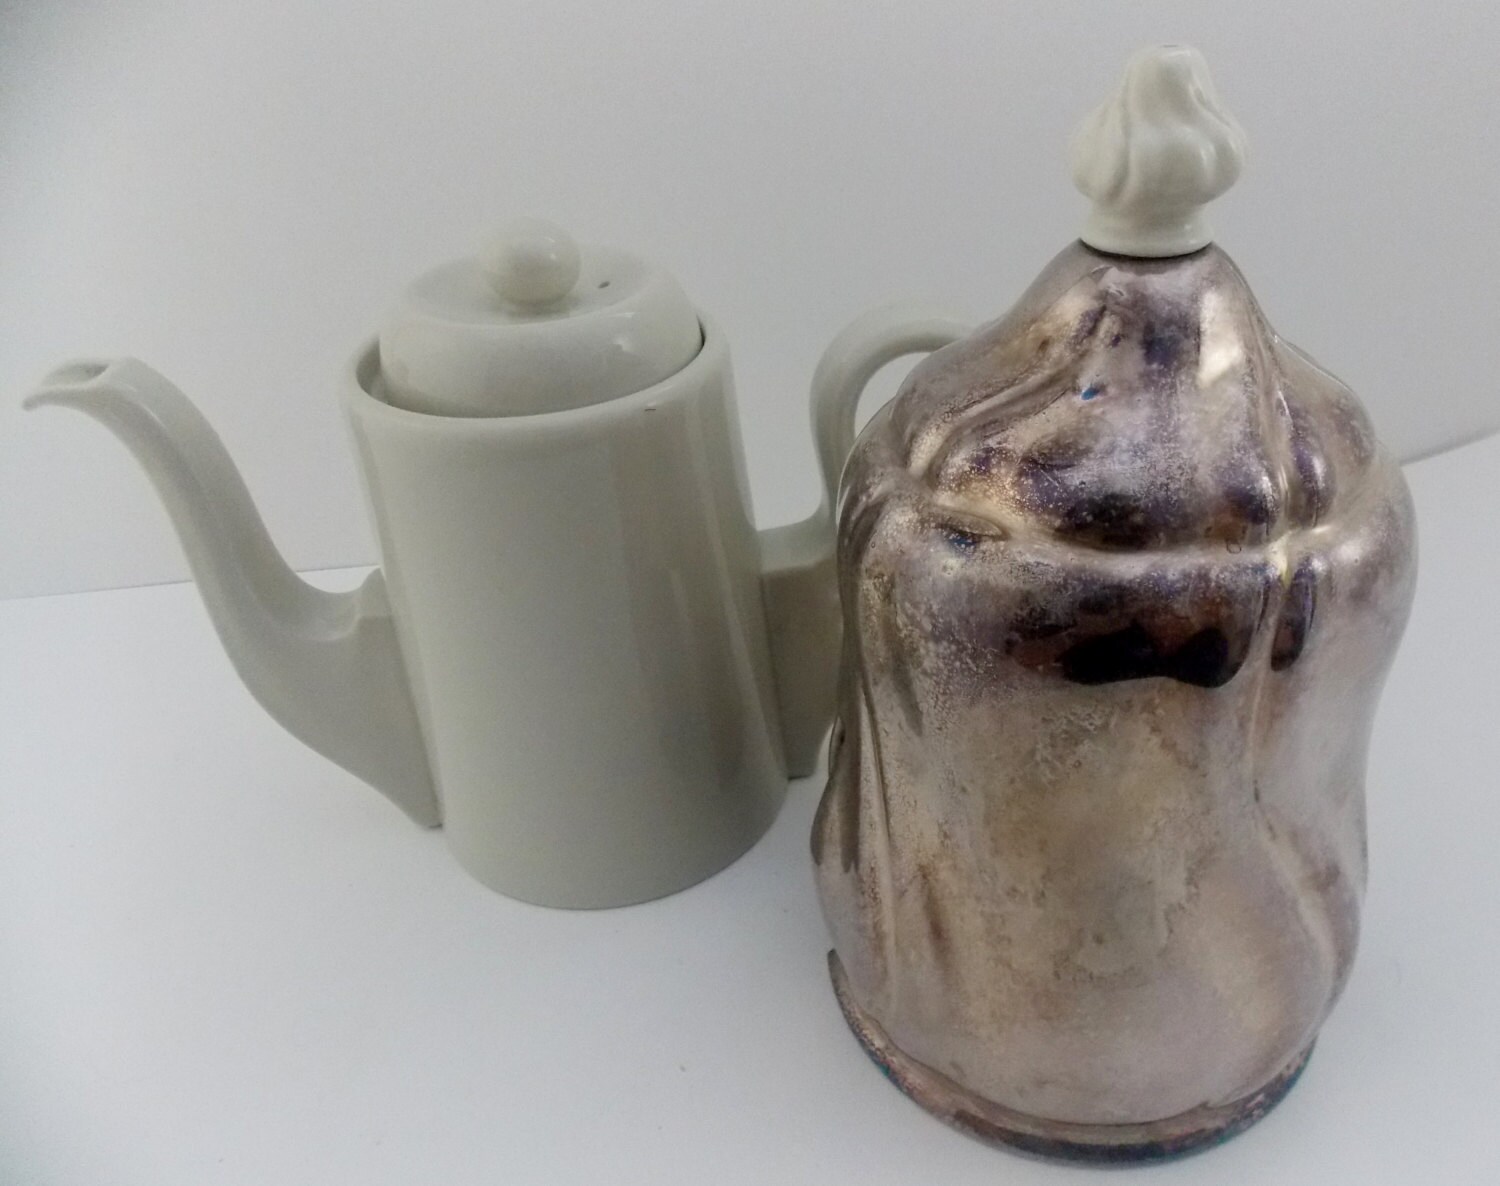 Porcelain teapot with an Insulated Metal tea cosy